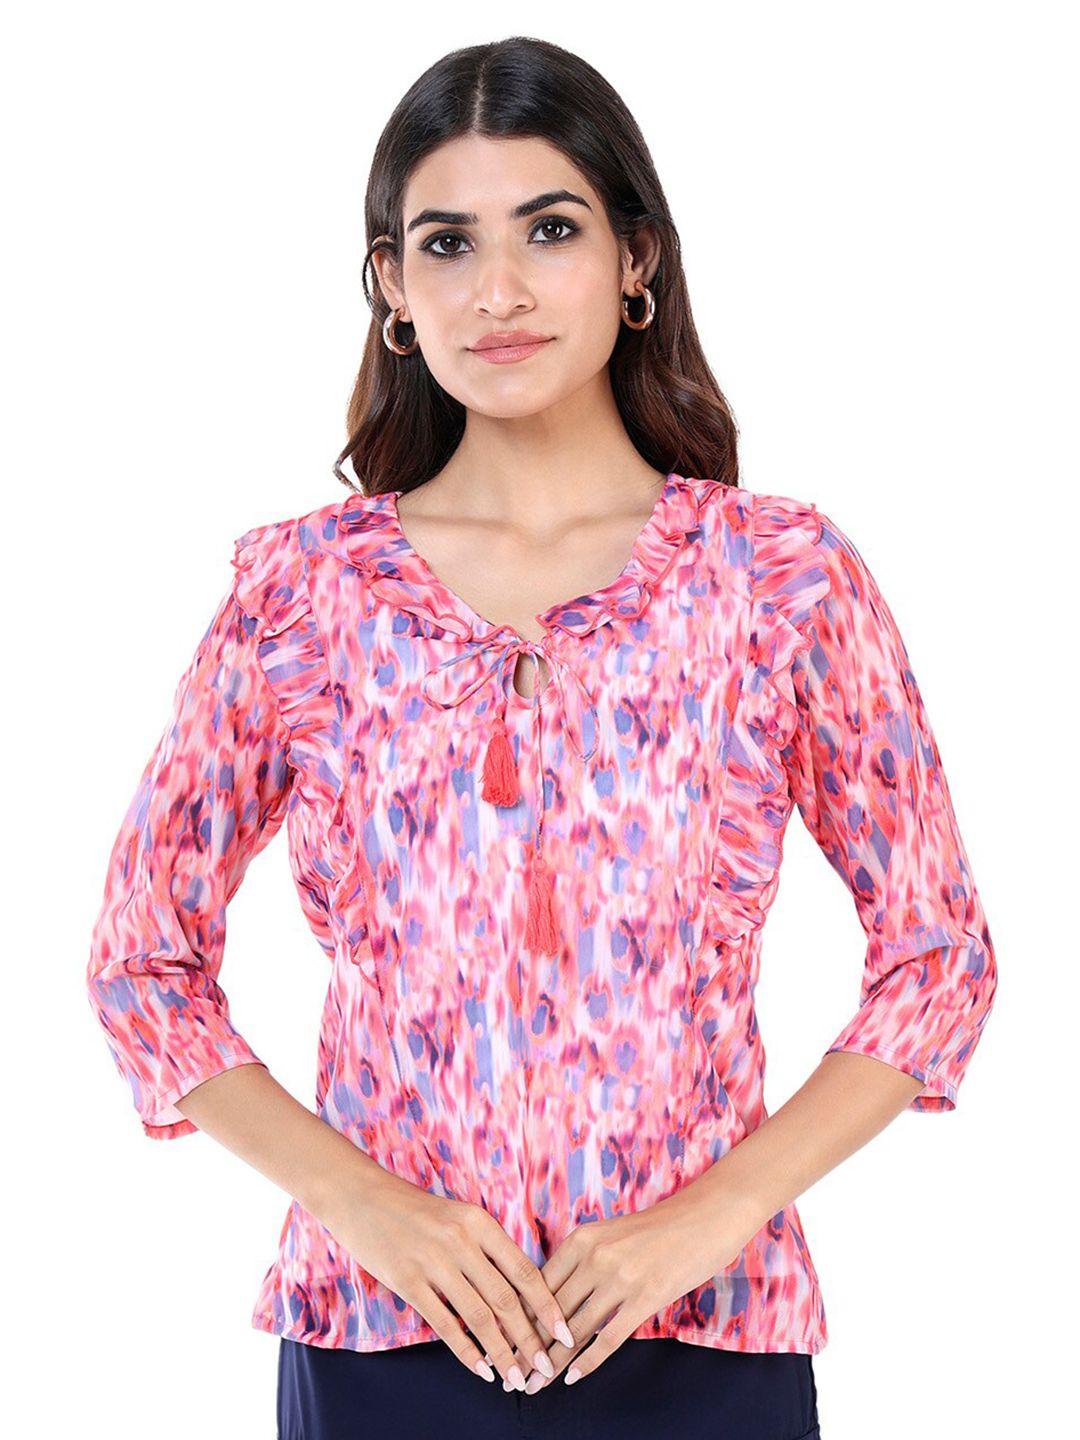 not-so-pink-pink-&-blue-print-tie-up-neck-ruffles-top